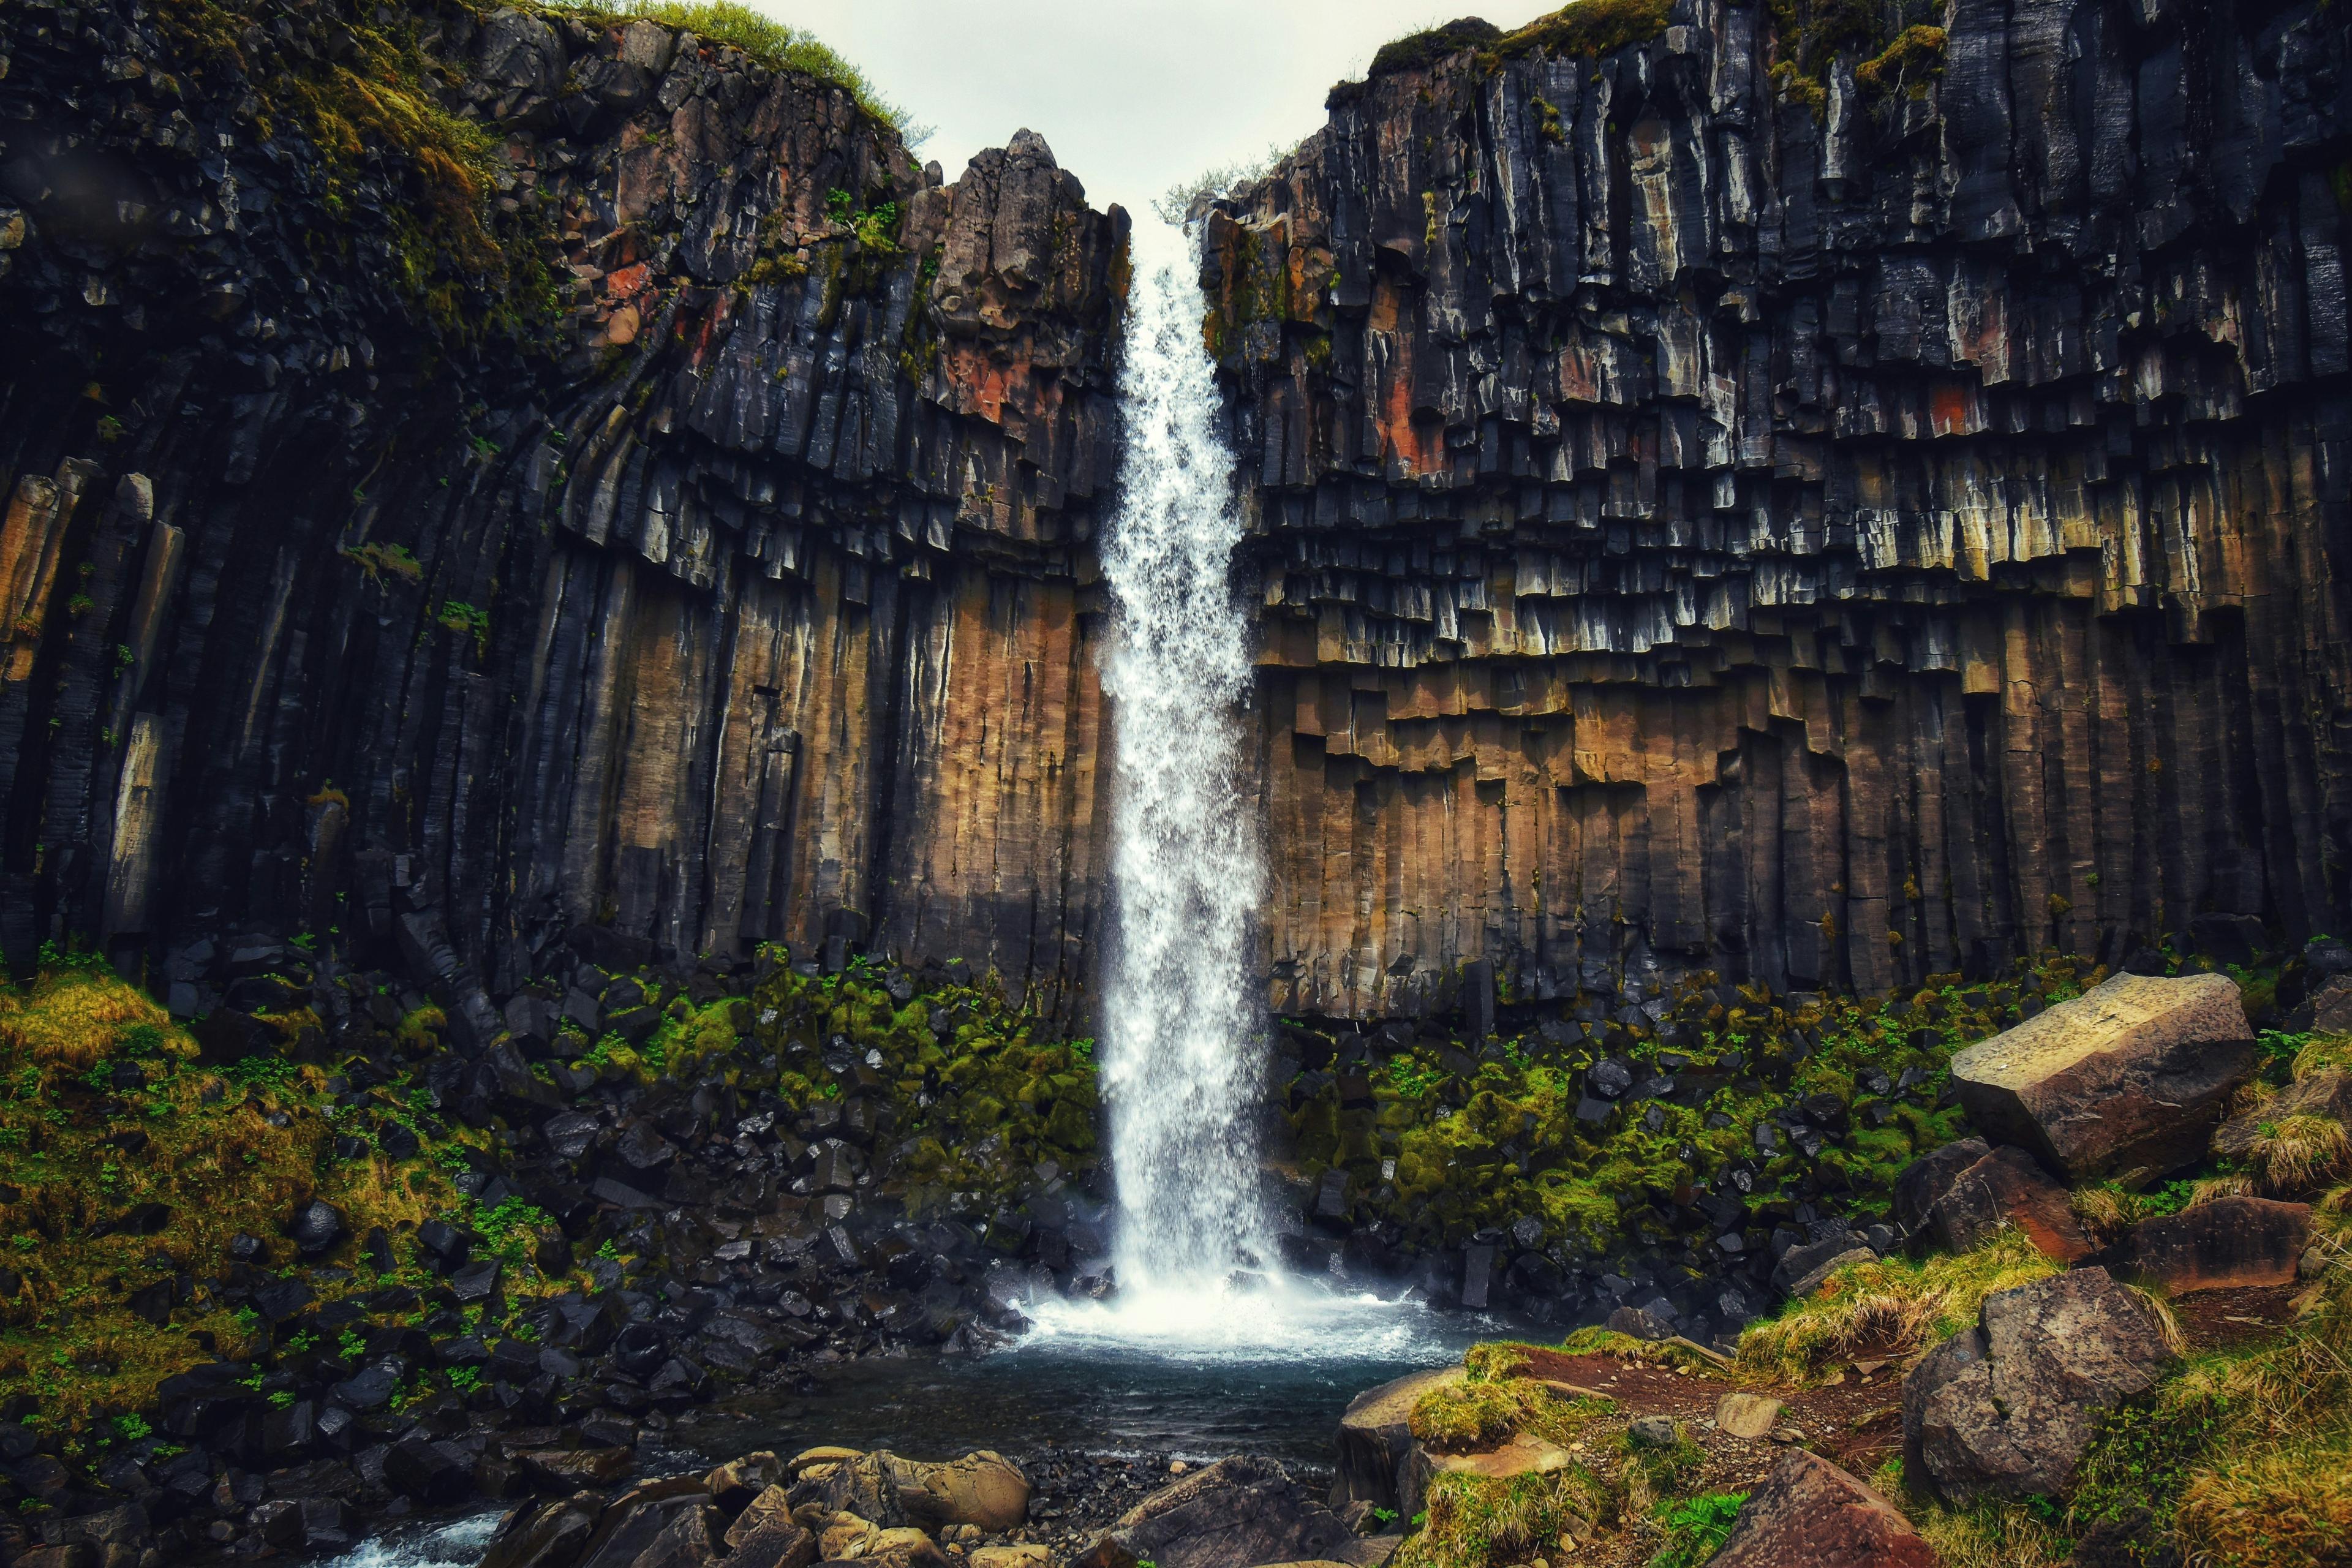 A majestic waterfall descending from a height, framed by striking columnar basalt formations, with lush greenery and rocks at its base.